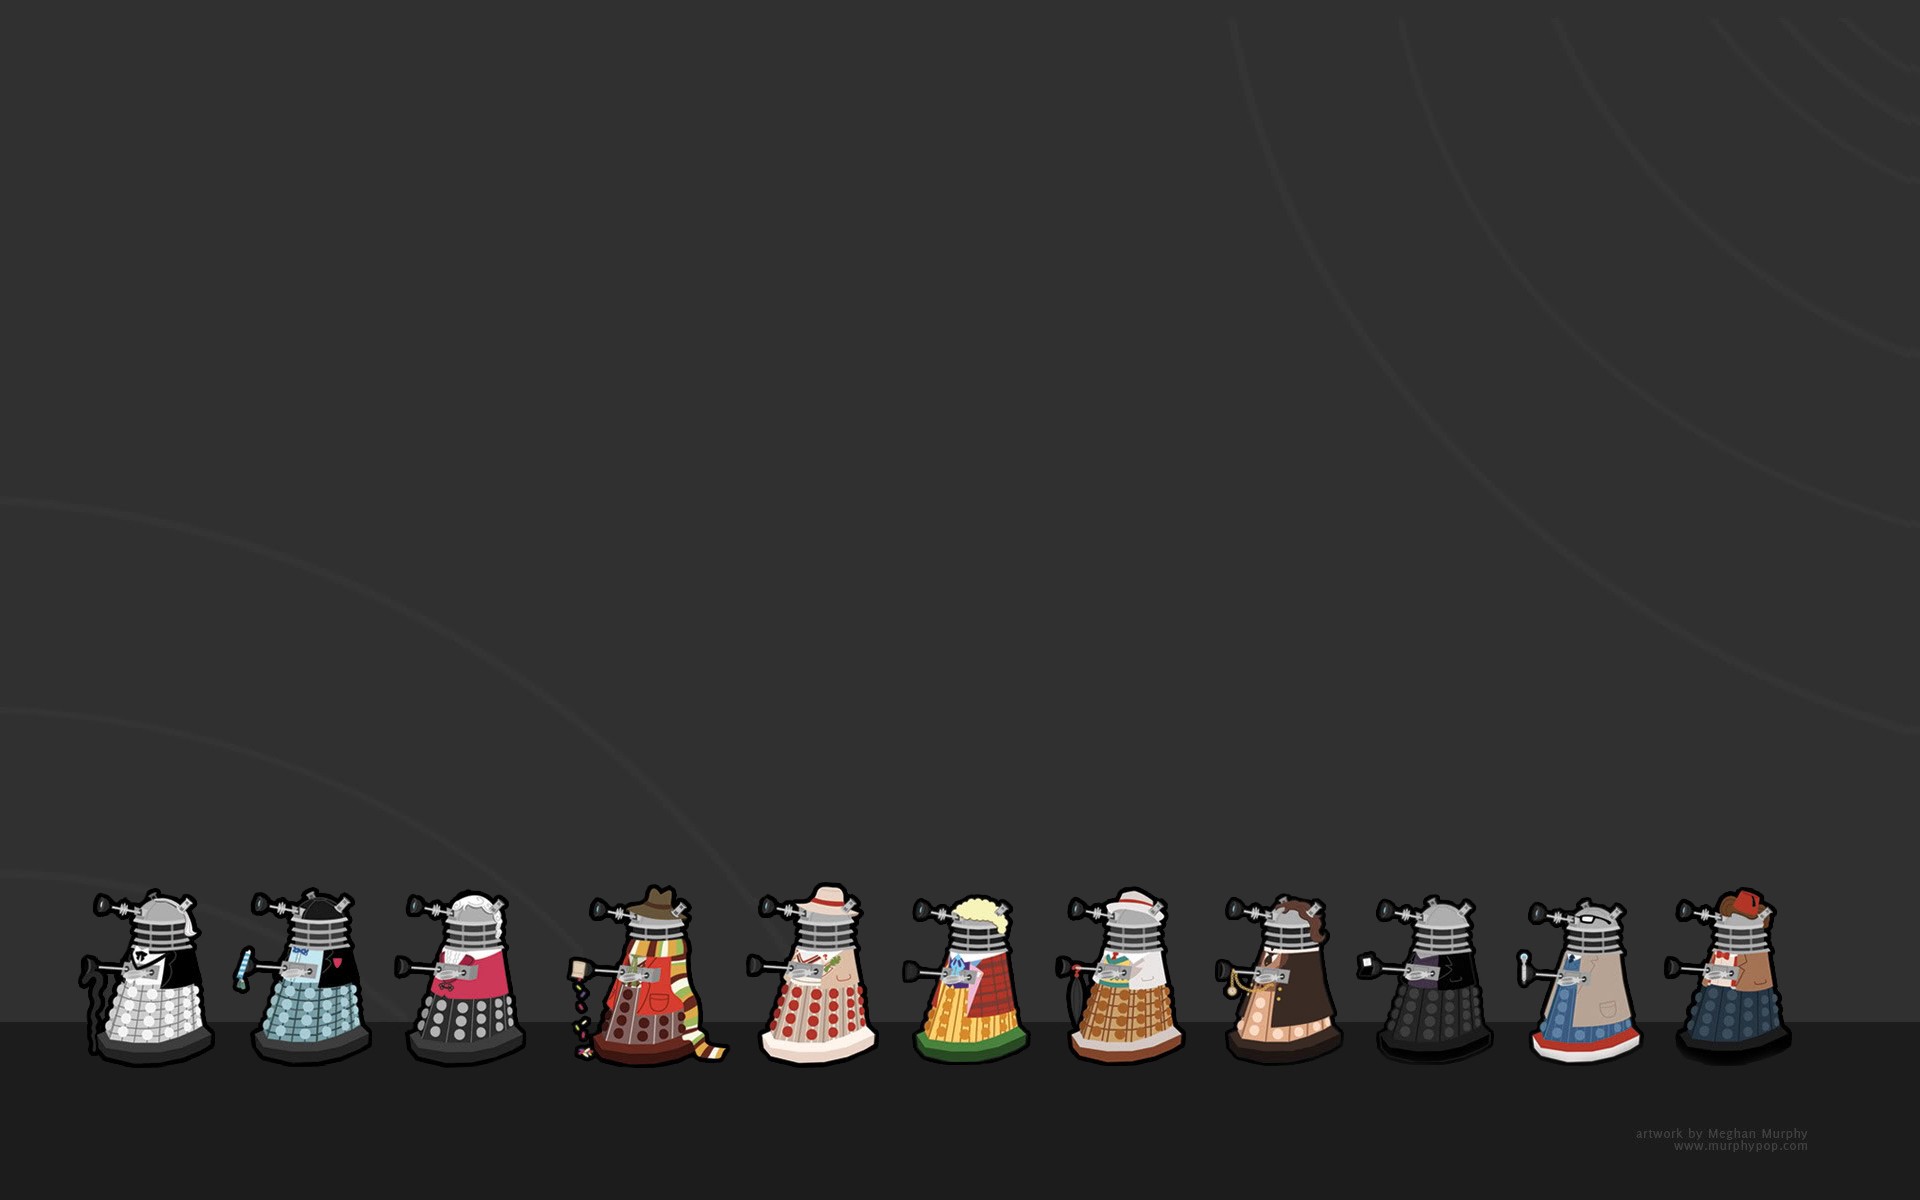 General 1920x1200 artwork Daleks science fiction TV series Doctor Who gray background simple background